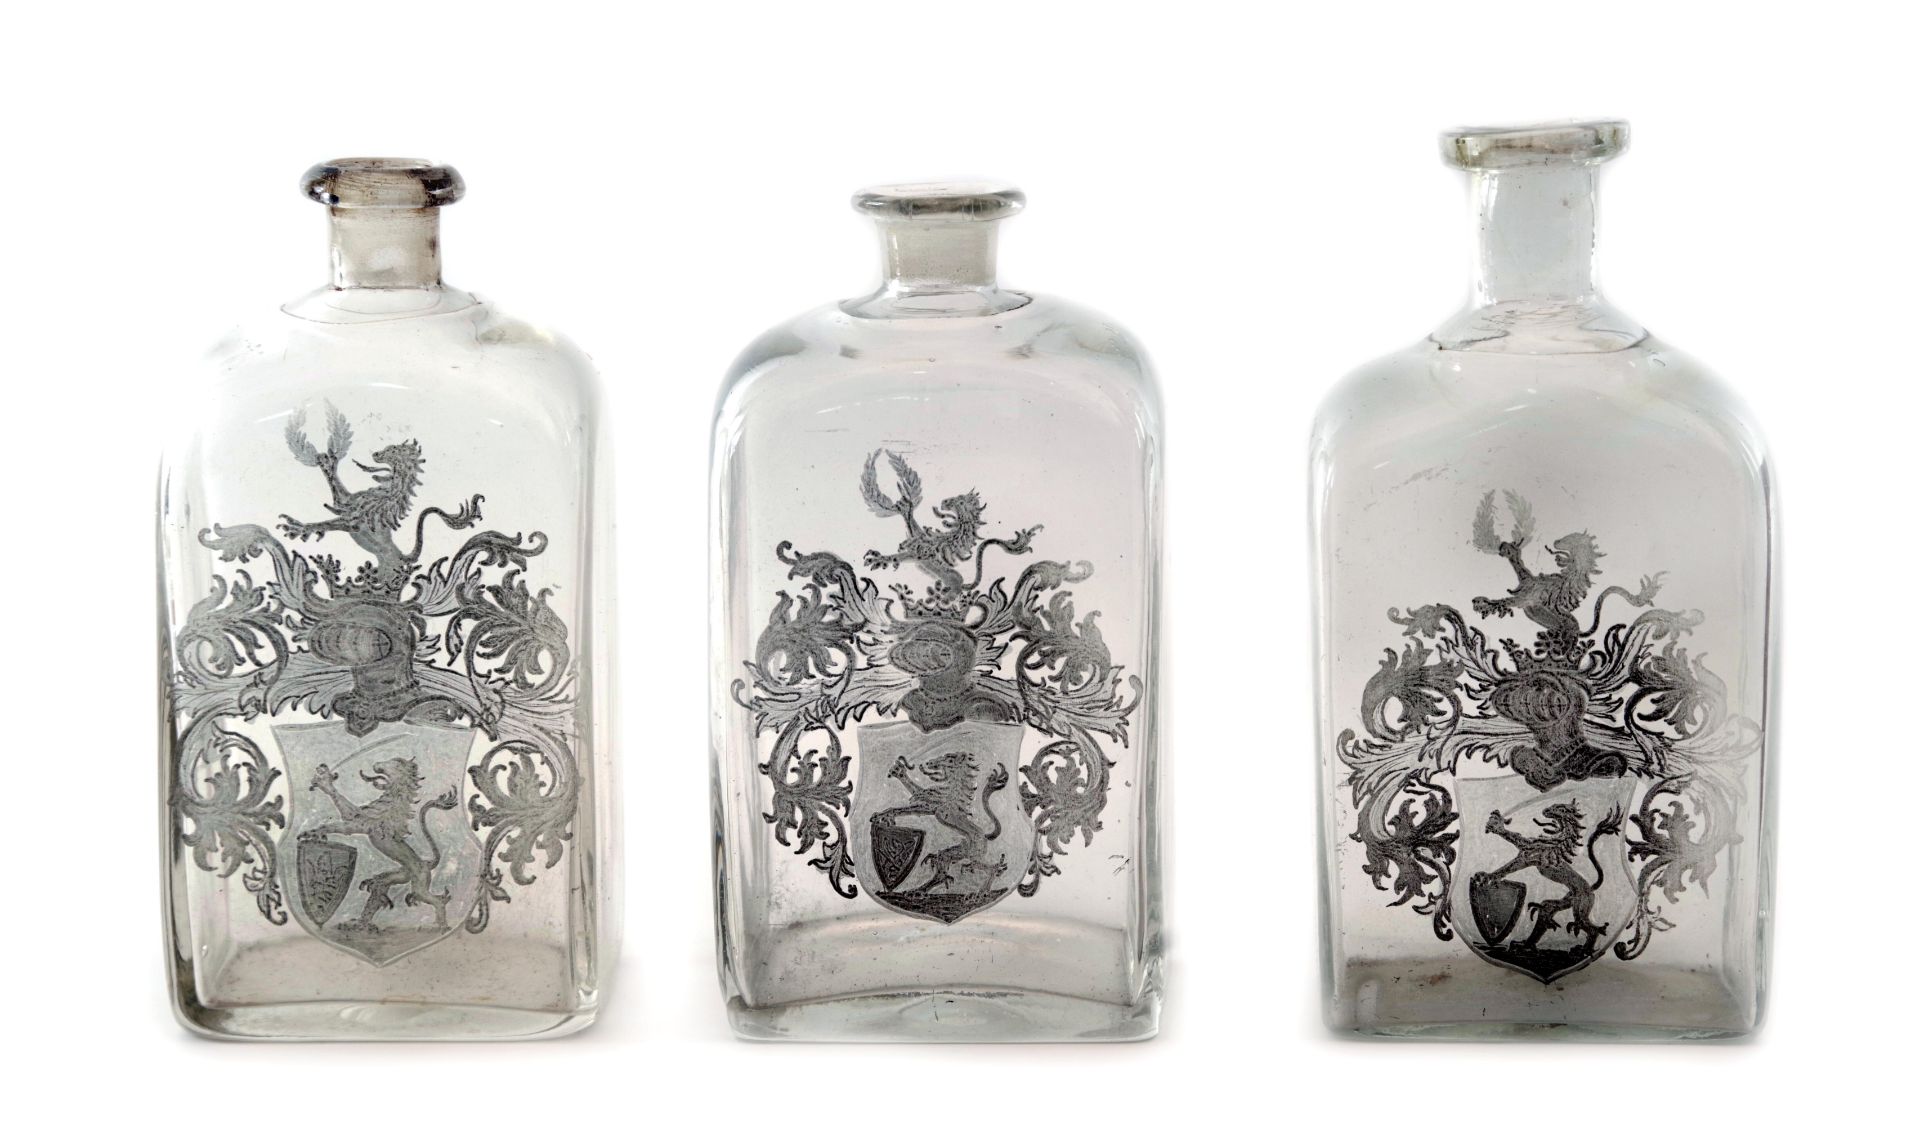 A case with three bottles for potions or alcohol - Image 2 of 3